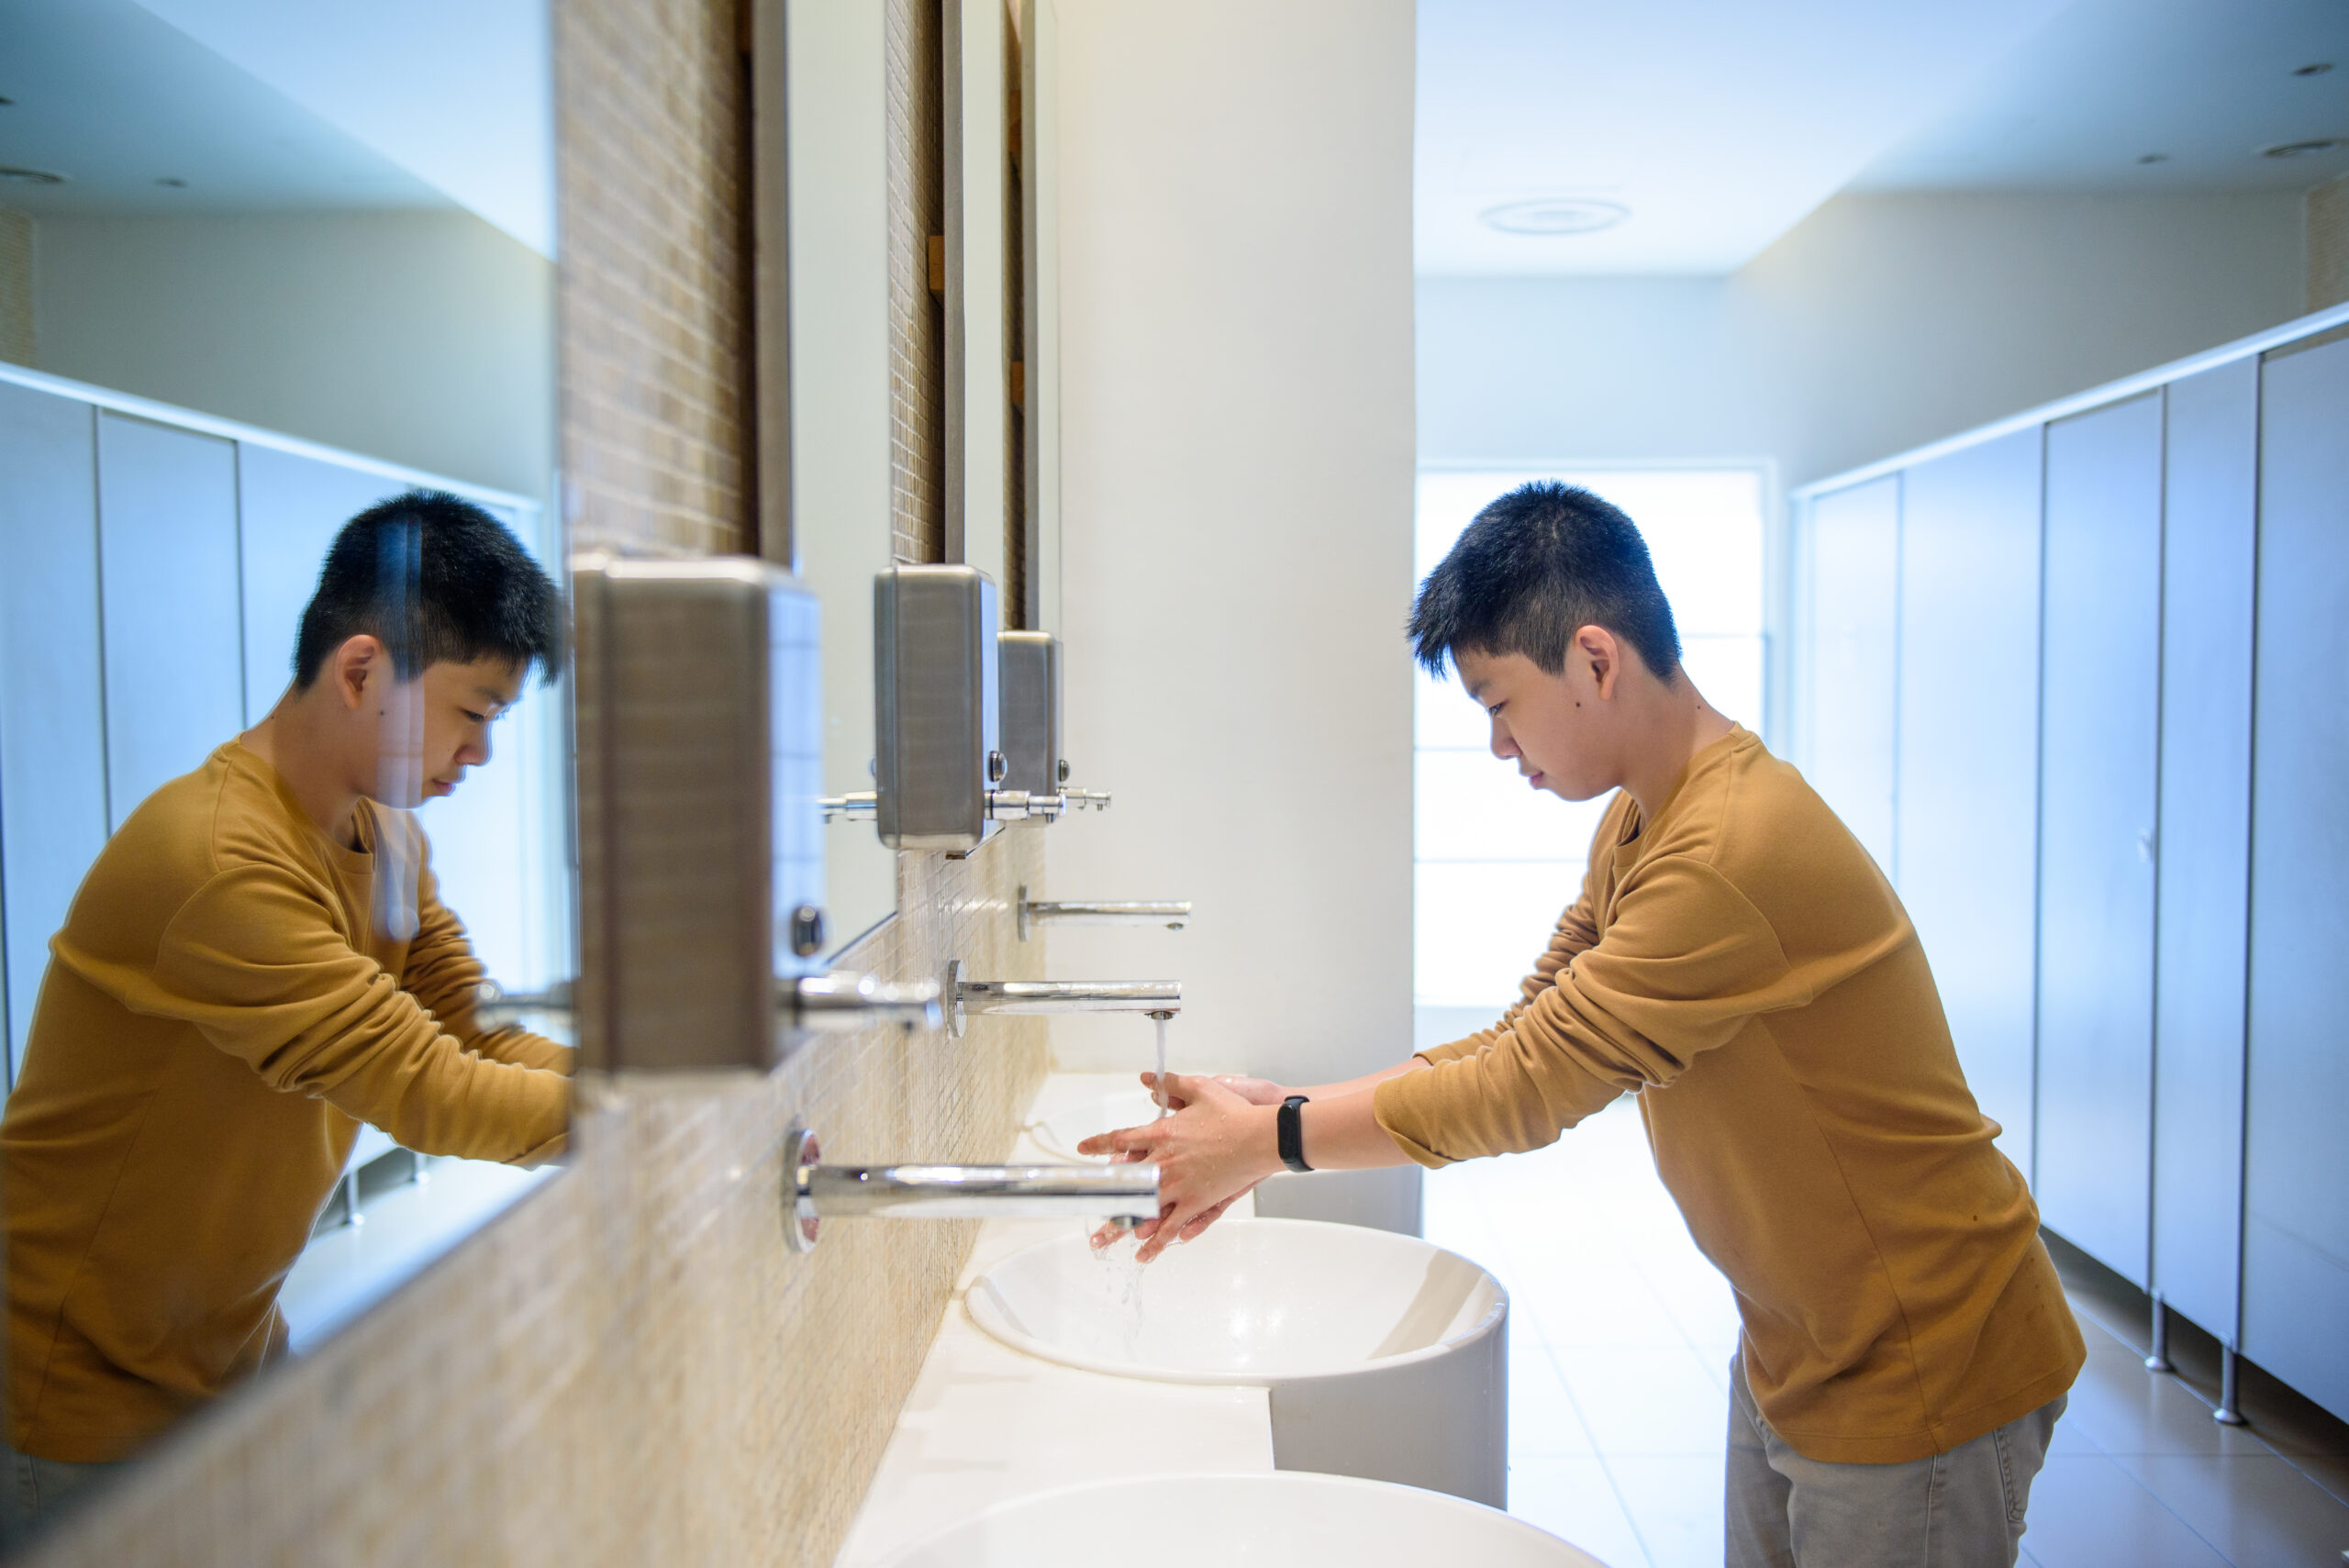 Photo: A boy in a yellow long-sleeve shirt washes his hands in a public restroom.